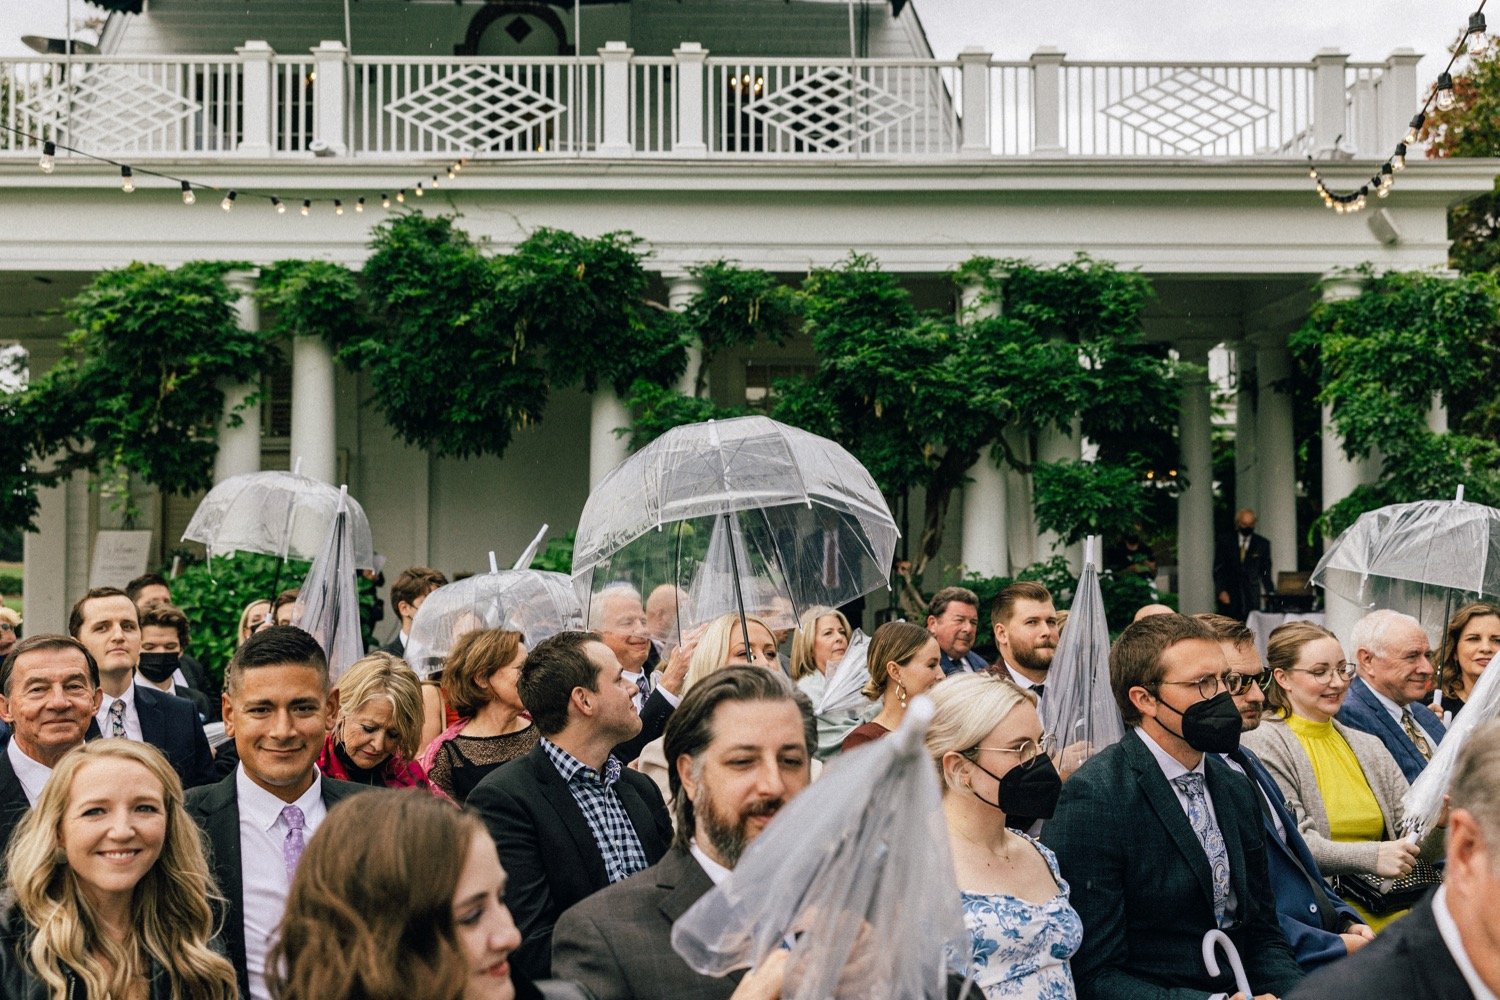  Wedding guests open clear umbrellas during ceremony 